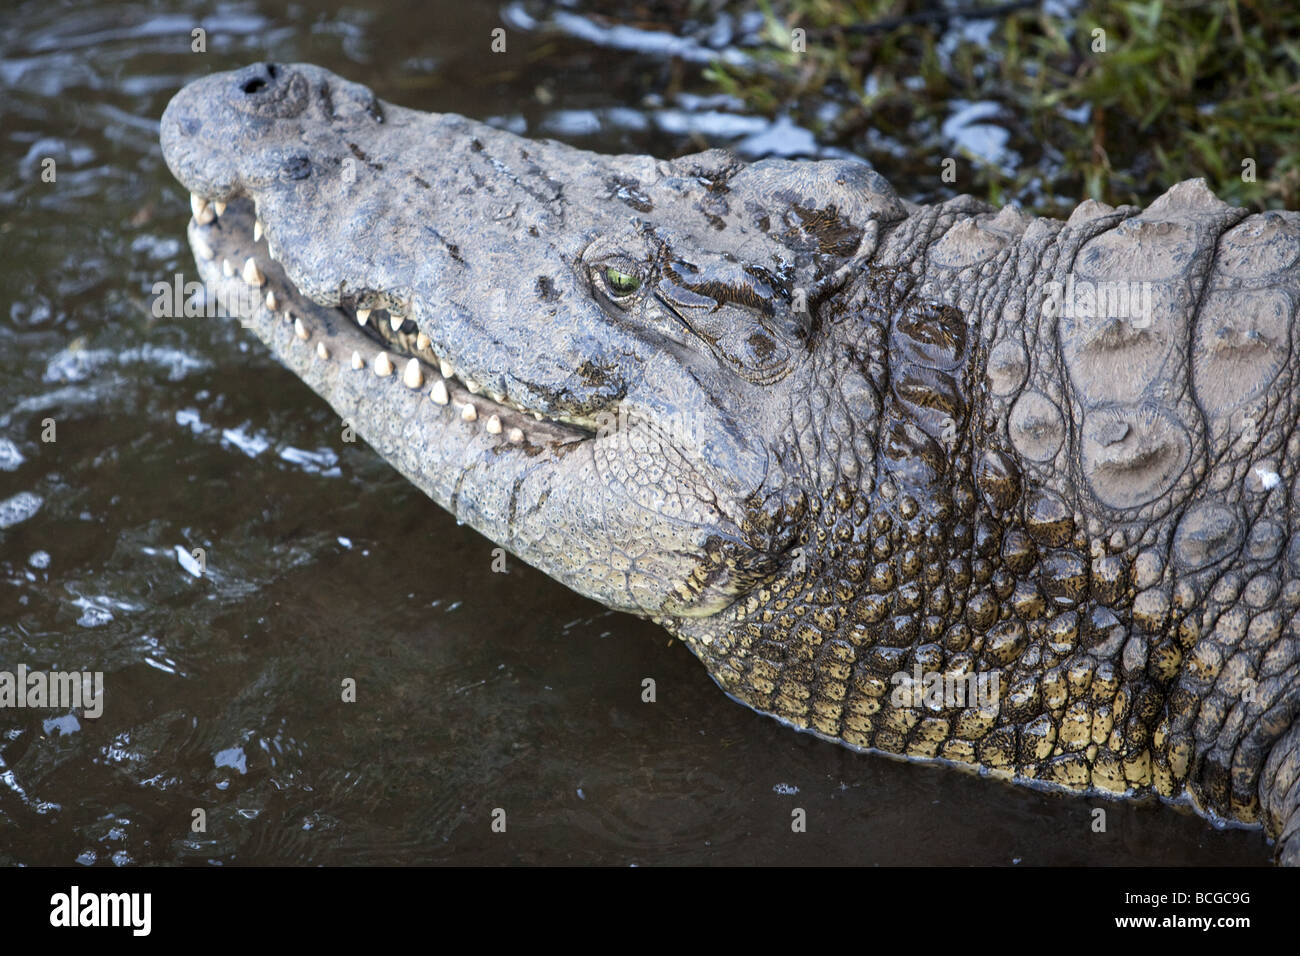 close up shot of face and neck of an African Nile Crocodile entering water Stock Photo